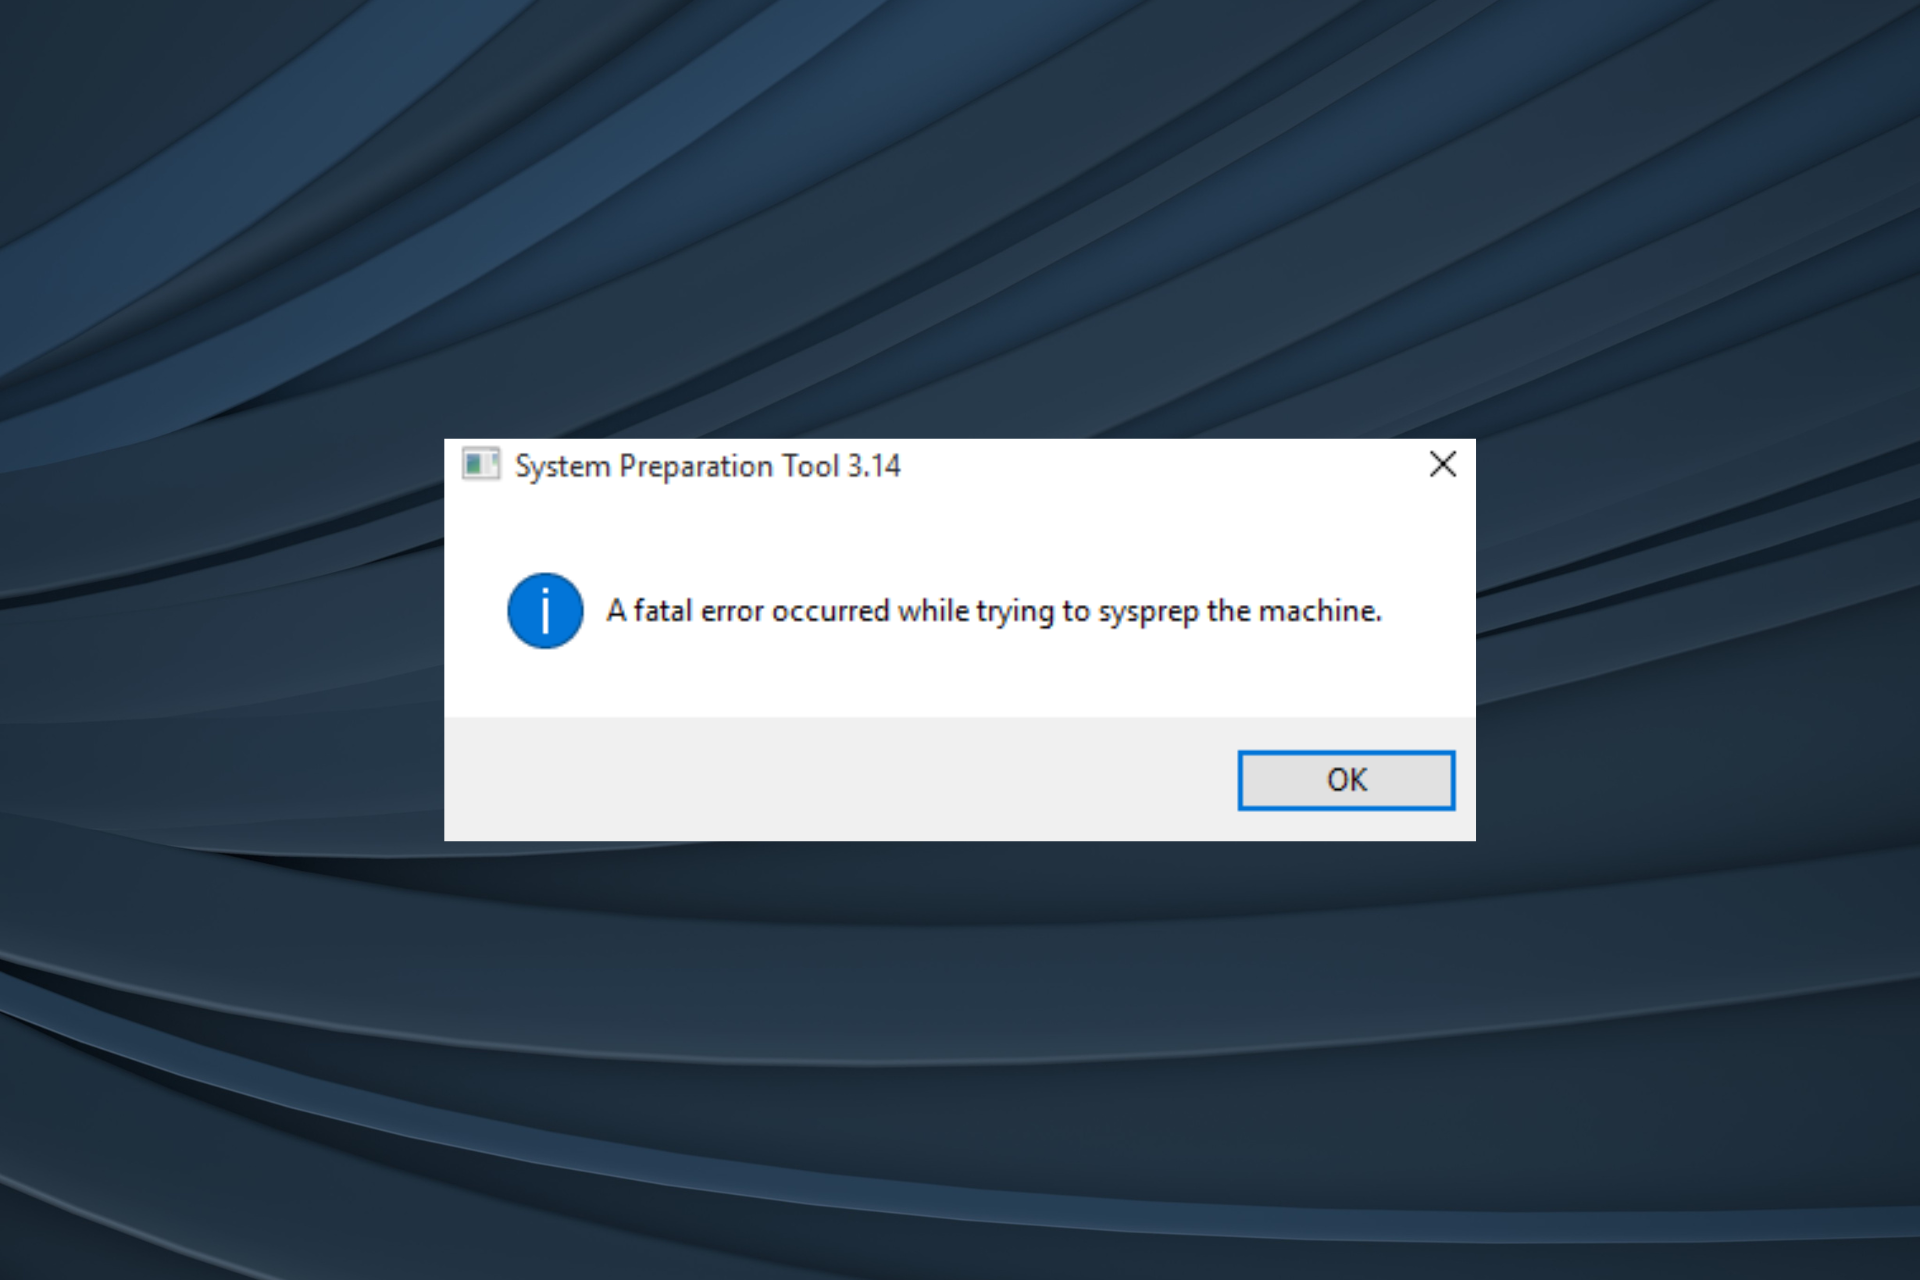 fix a fatal error occurred while trying to sysprep the machine